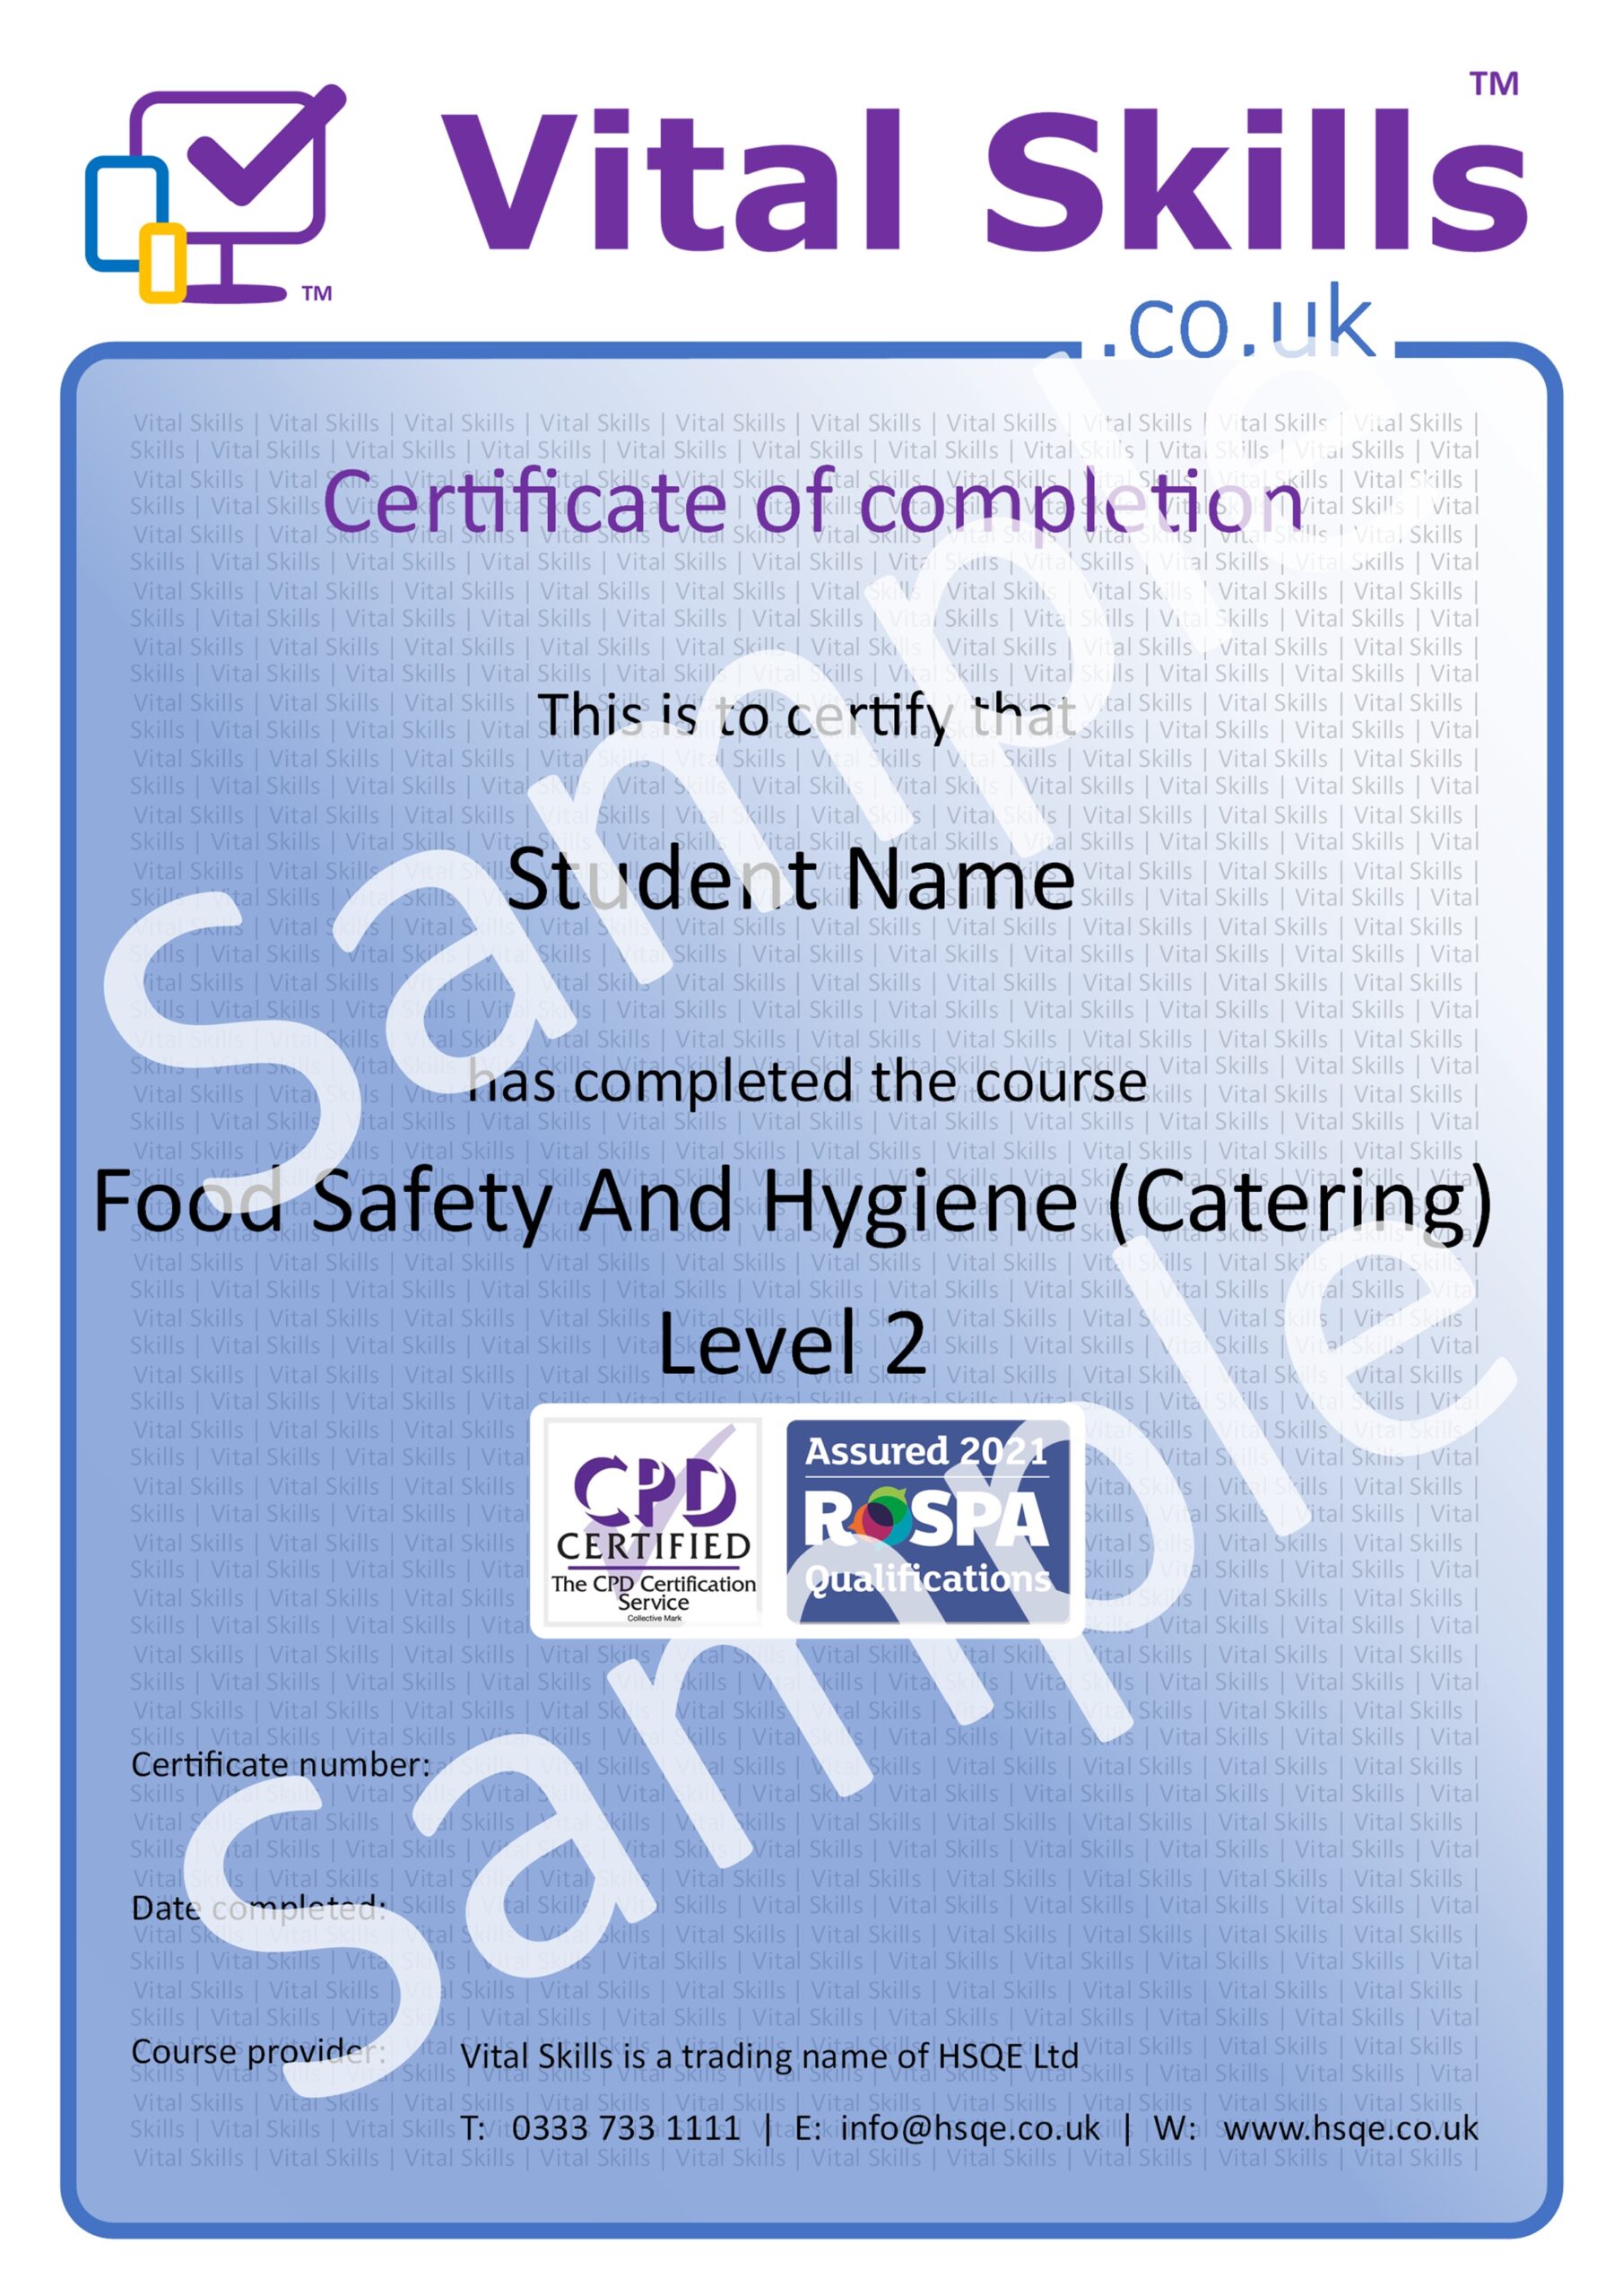 Food Safety And Hygiene Catering Level 2 Online Training Course Certificate HSQE Vital Skills